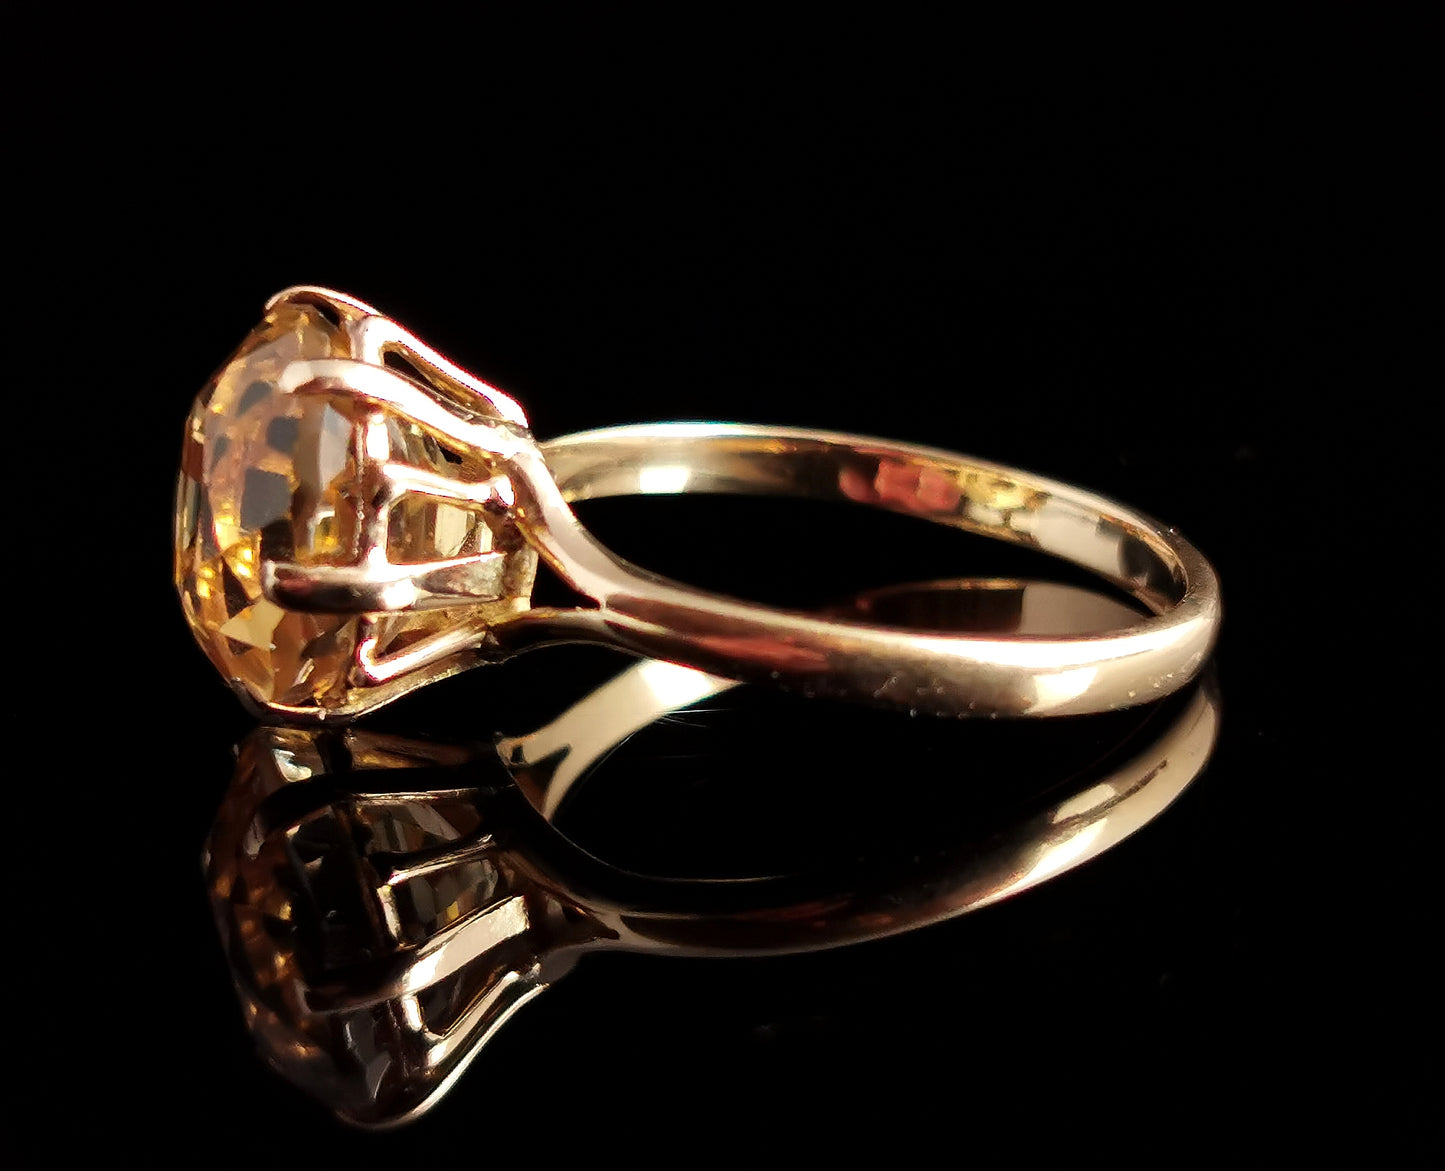 Vintage Citrine cocktail ring, 9ct yellow gold